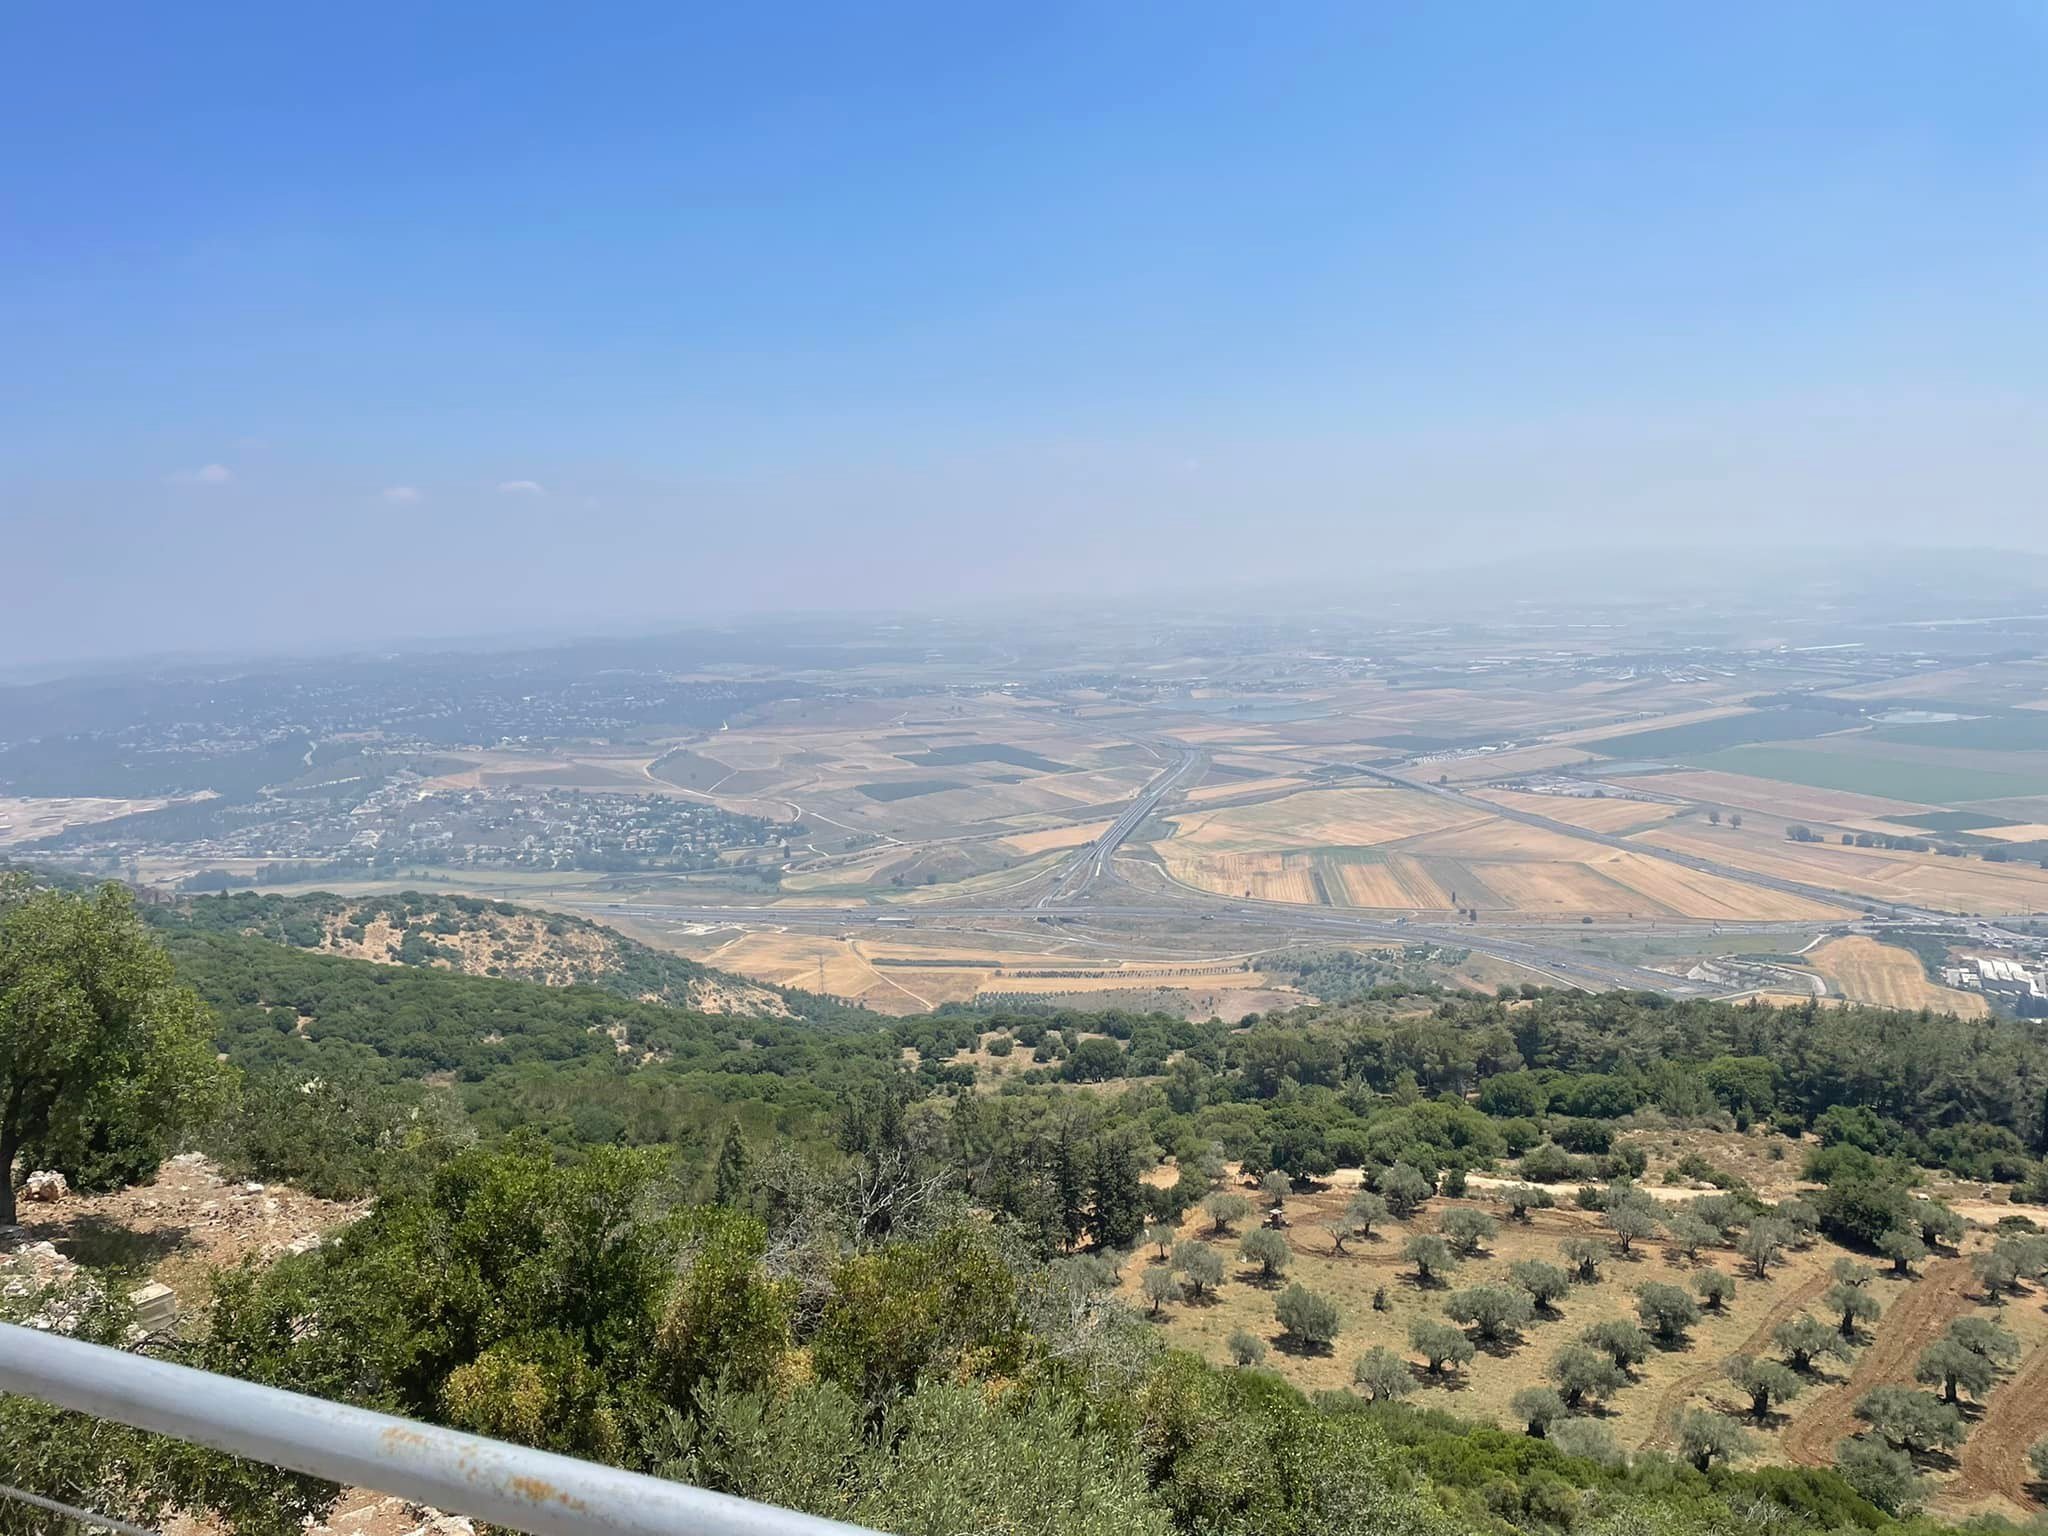  A view from Mount Carmel, where Elijah defeated mighty King Ahab and 450 prophets of Ba’al and 400 prophets of Ashera. 